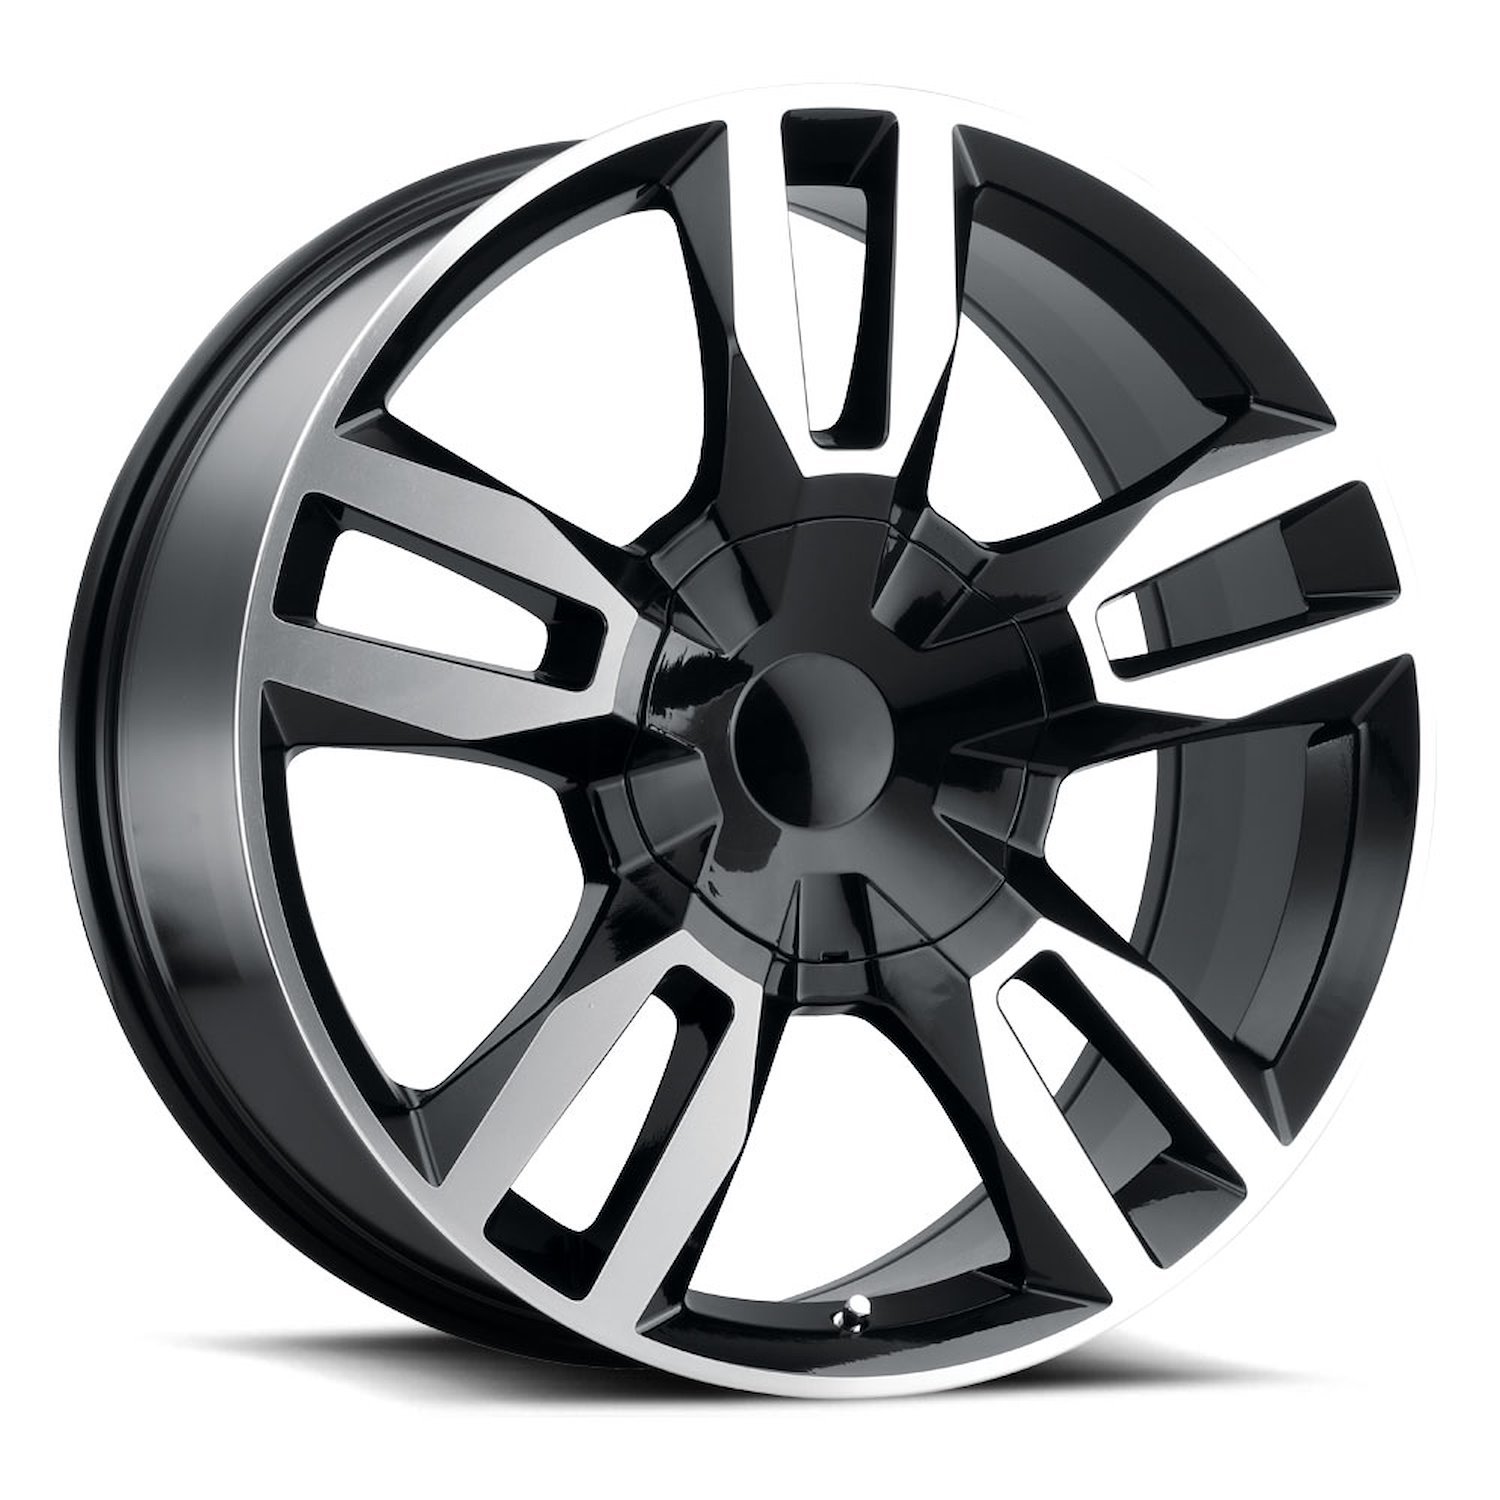 Replica RST 229-6139-24 GBM RST Wheel [Size: 22" x 9"] Finish: Gloss Black Machined Face